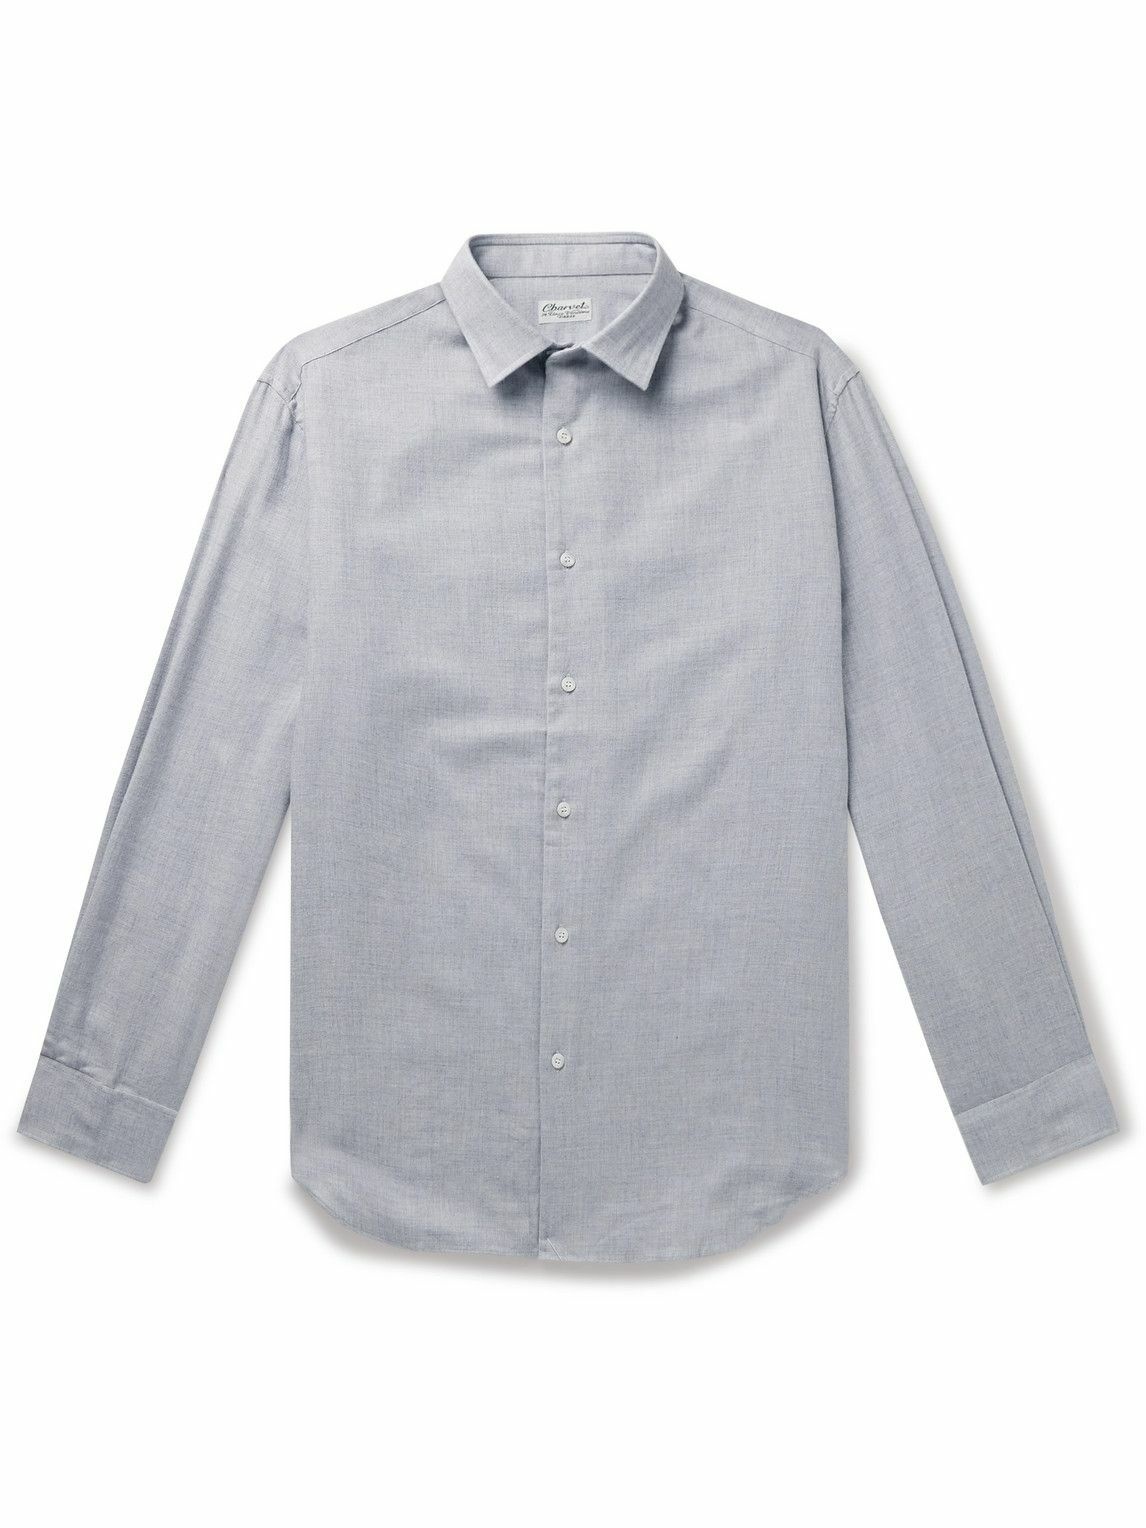 Photo: Charvet - Brushed Cotton and Wool-Blend Shirt - Gray